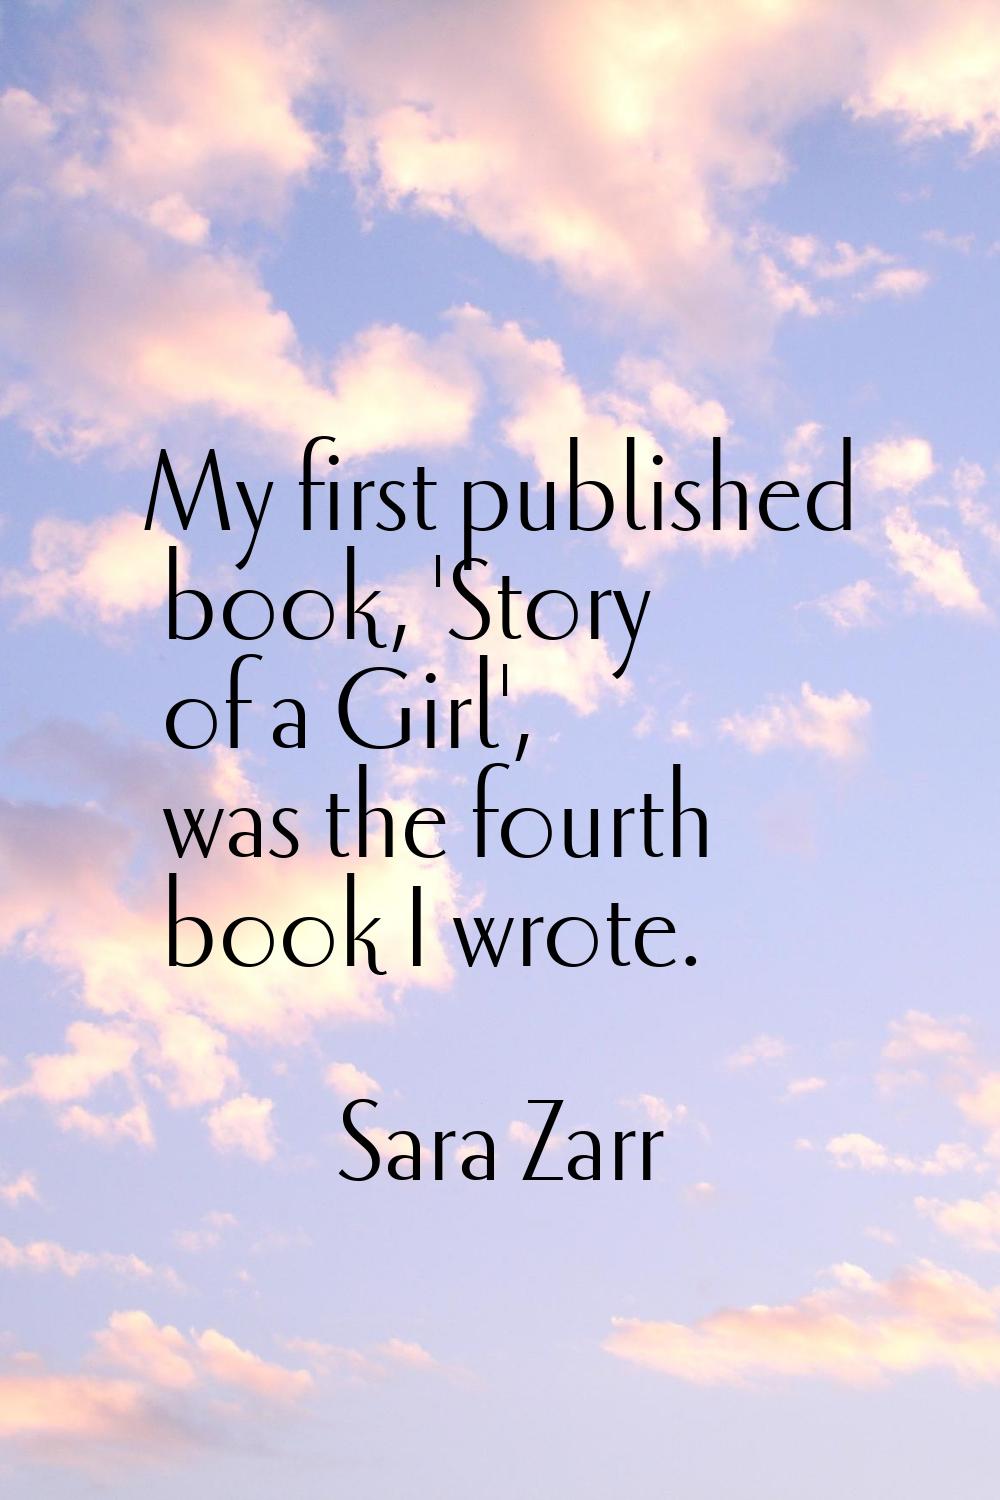 My first published book, 'Story of a Girl', was the fourth book I wrote.